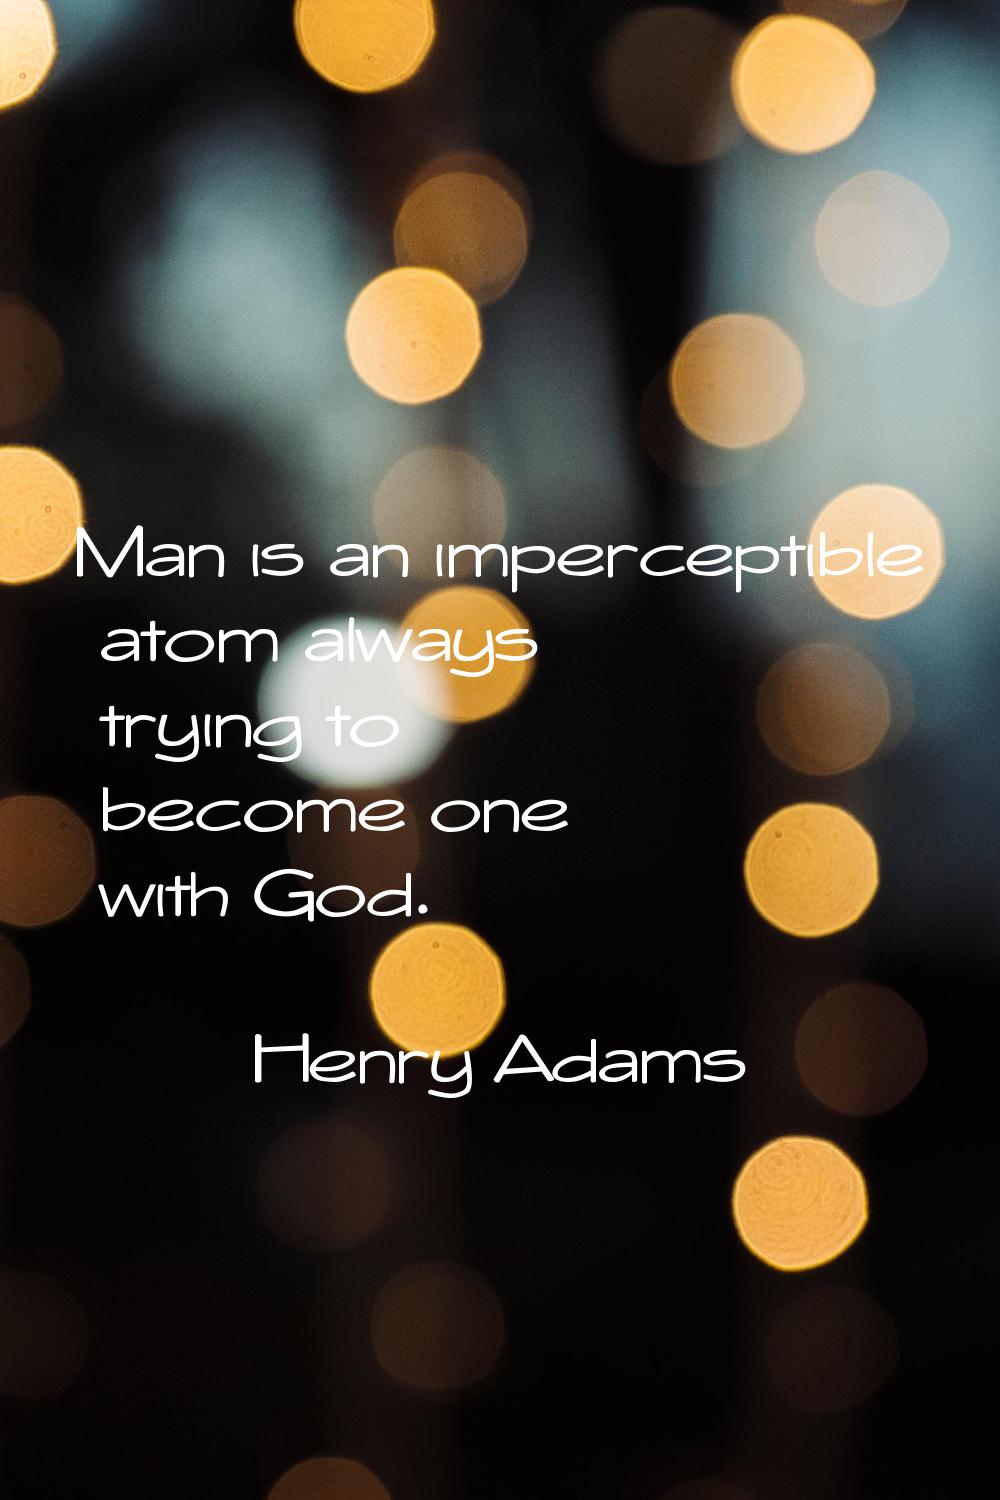 Man is an imperceptible atom always trying to become one with God.